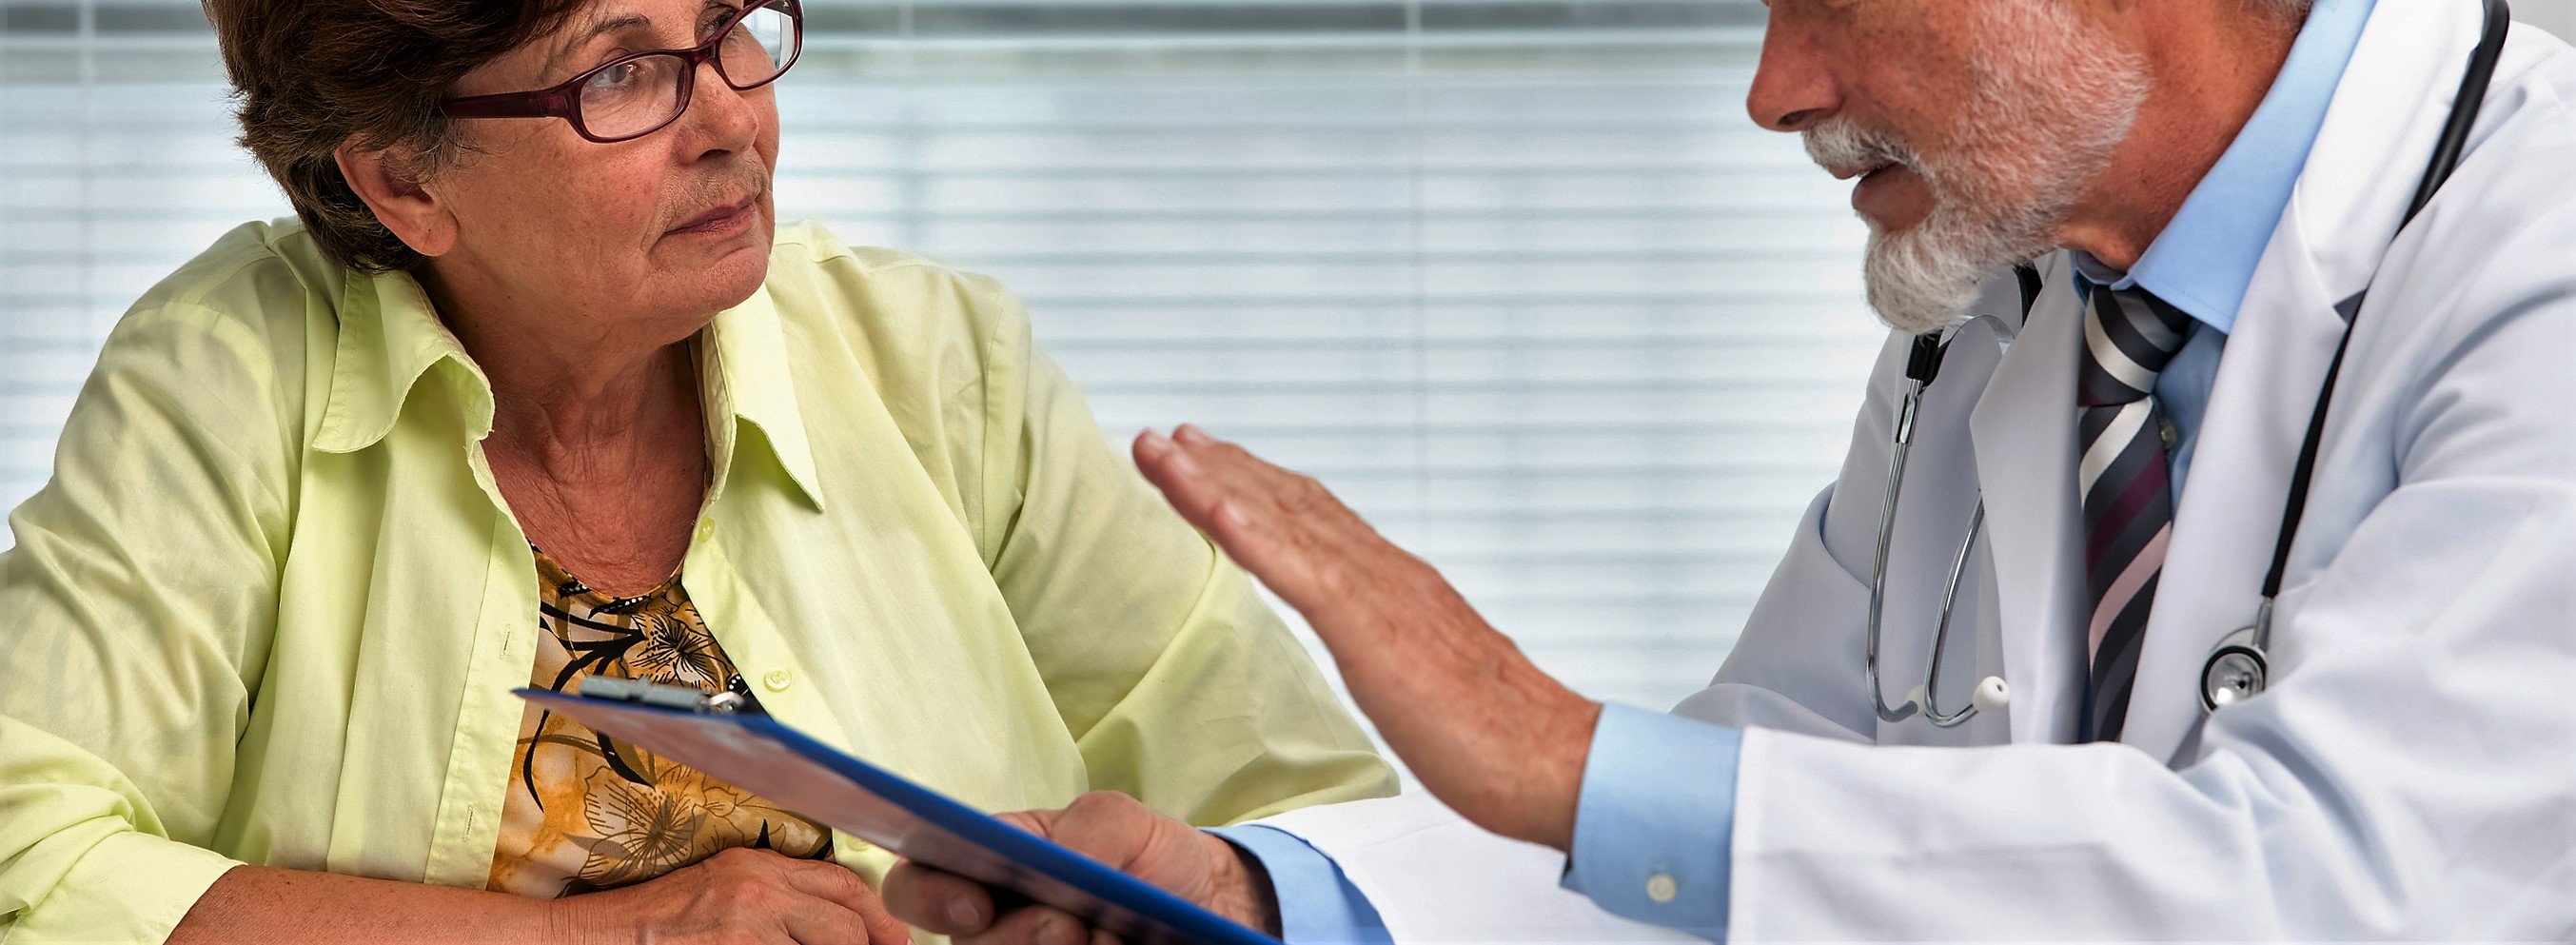 4 Ways eClinicalWorks Can Improve Patient and Physician Communication